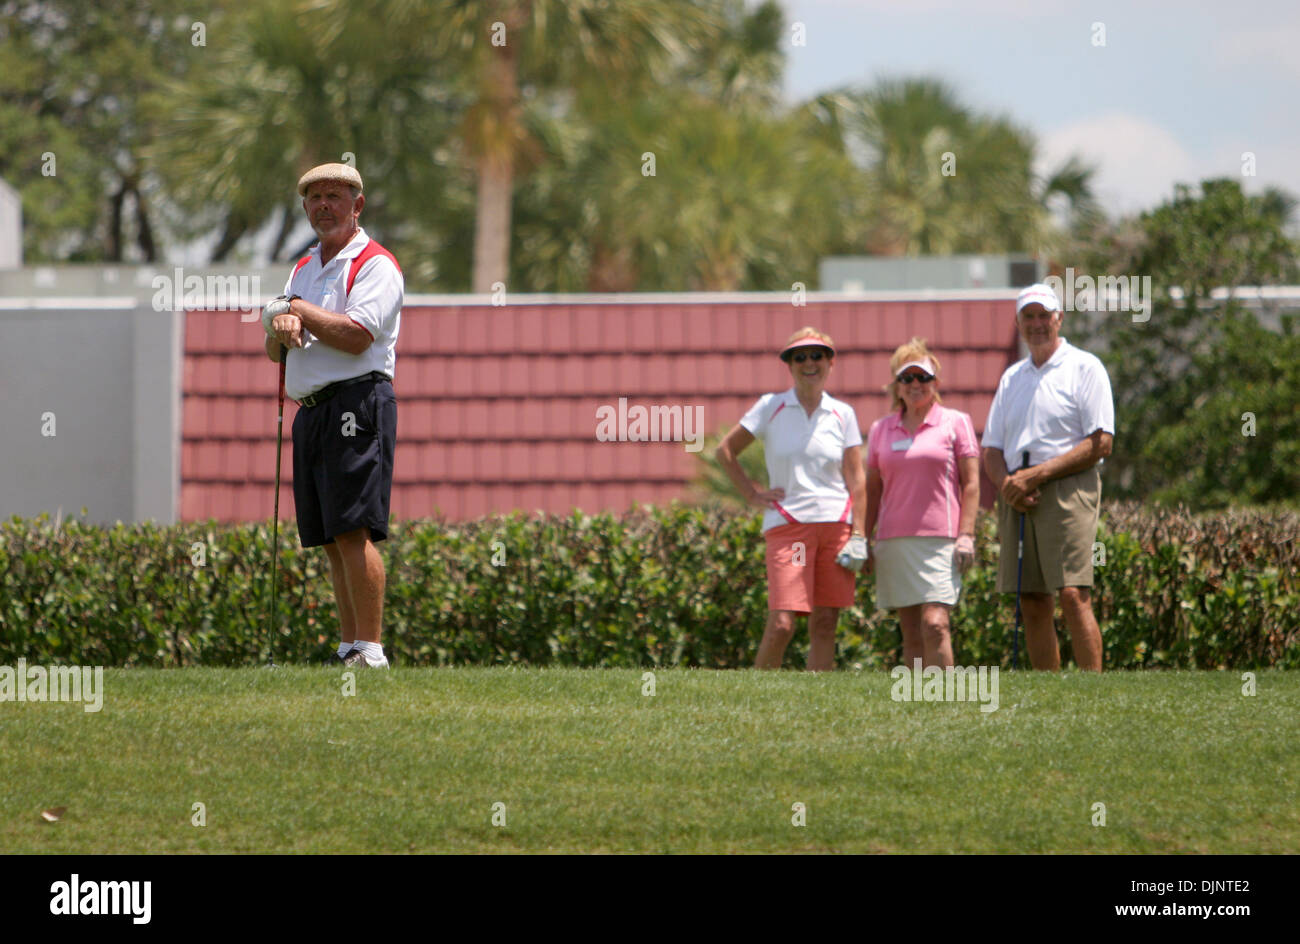 PT 305160 repo single 1 of 3.MIKE CAMUNAS  |  Times.(04/25/2009 NEW PORT RICHEY --  Lou Lakatos (cq) readies to tee off, while, from left to right, Edie Senensky (cq), Lucy Dowie (cq) and Herbert Simpson watch during an outing for the Tampa Bay chapter of the American Singles Golf Association.PT 305160 repo single 1 of 3. (Credit Image: © St. Petersburg Times/ZUMA Press) Stock Photo